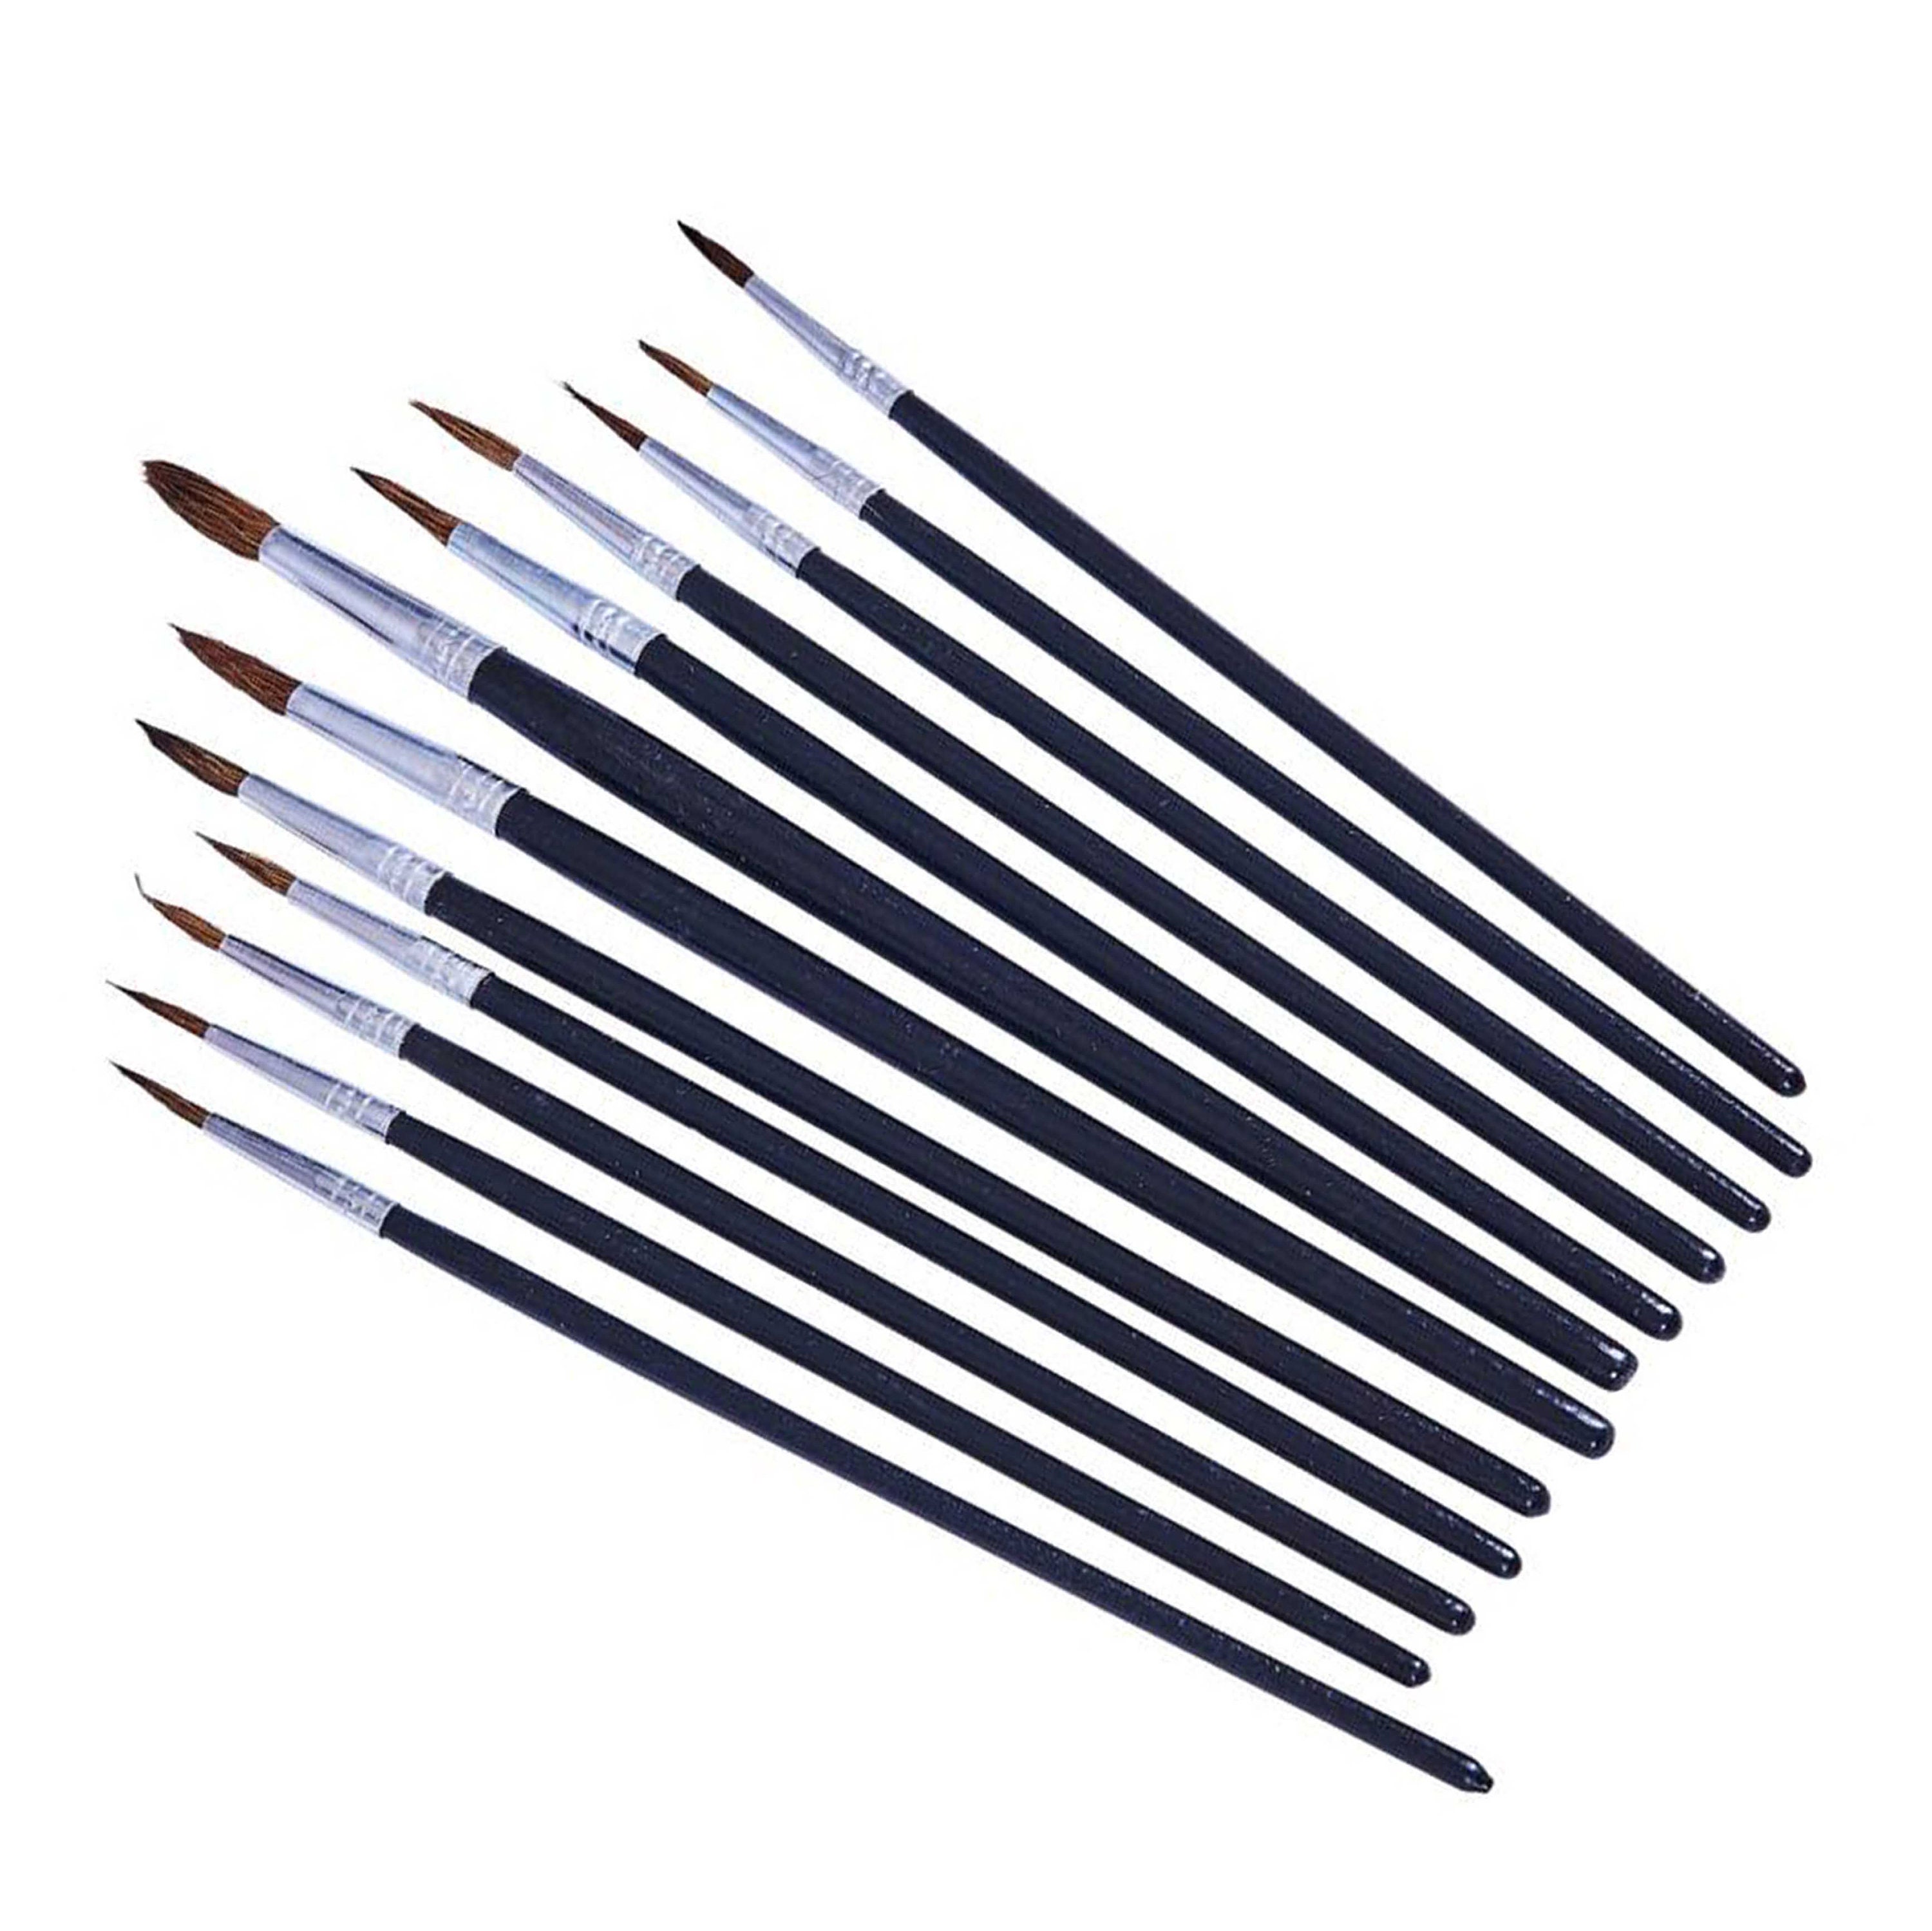 9 Pcs Filbert Long Handle Artist Paint Brush Set, Quality Synthetic Hair and  Wooden Handle for Acrylic Watercolor Oil Painting 